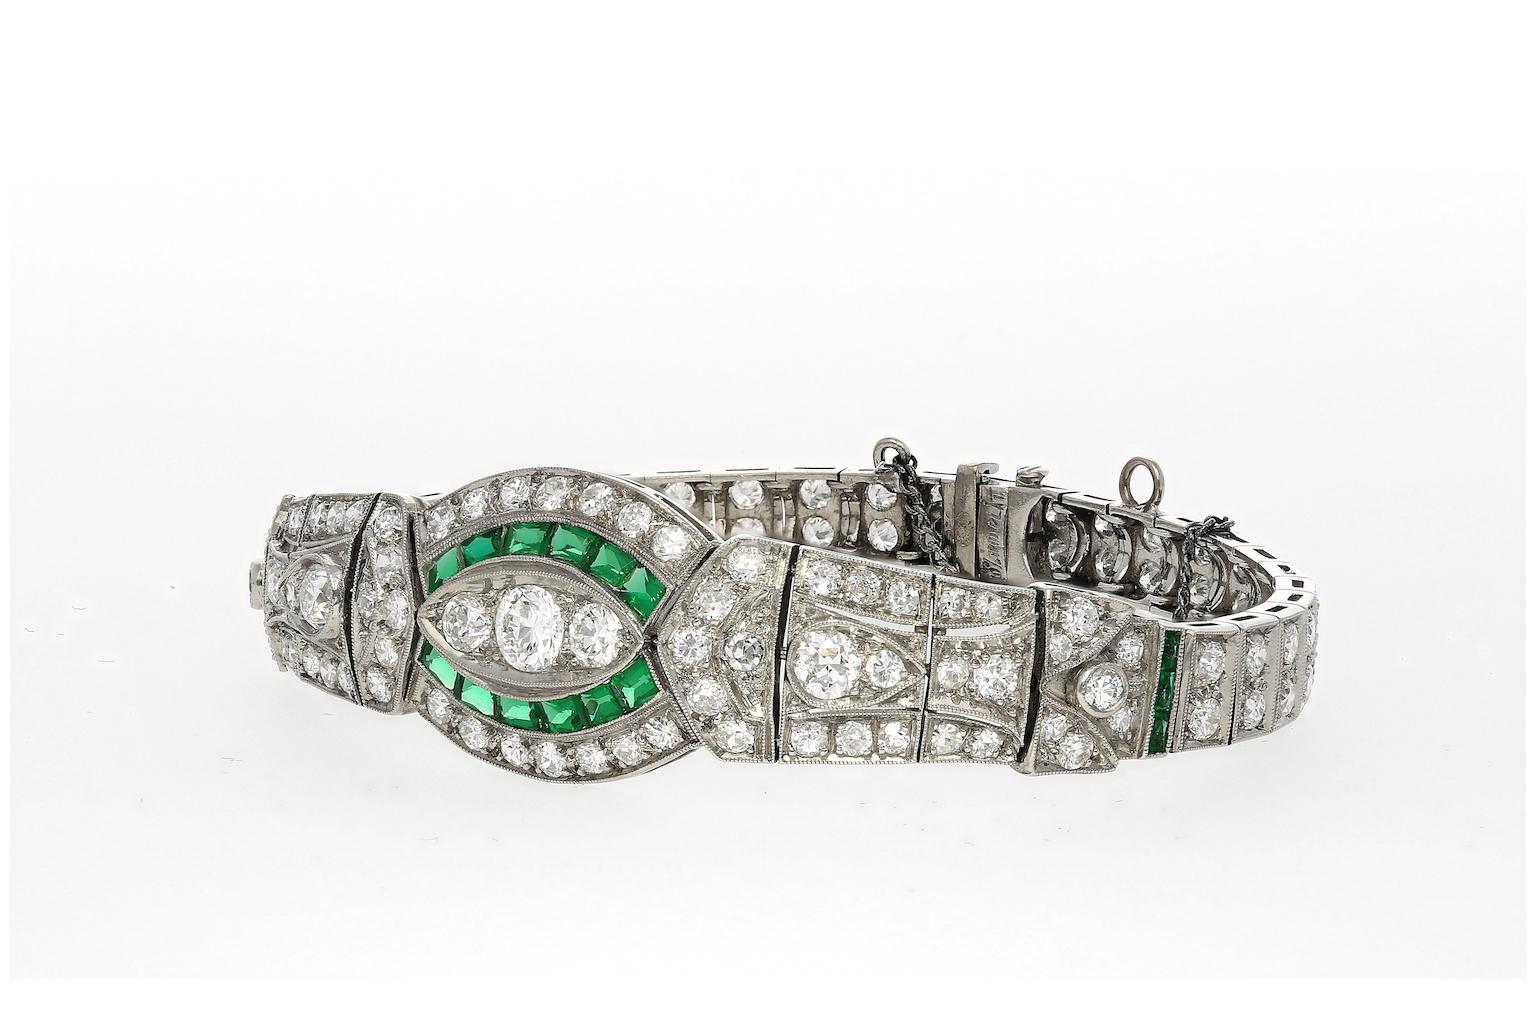 Original vintage/antique Art Deco era diamond and emerald bracelet Set with a 1 carat center stone, encrusted by 119 old-cut diamond accents and a beautifully tension-set halo of 18 baguette-cut emeralds. Handmade by expert jewelers almost 100 years